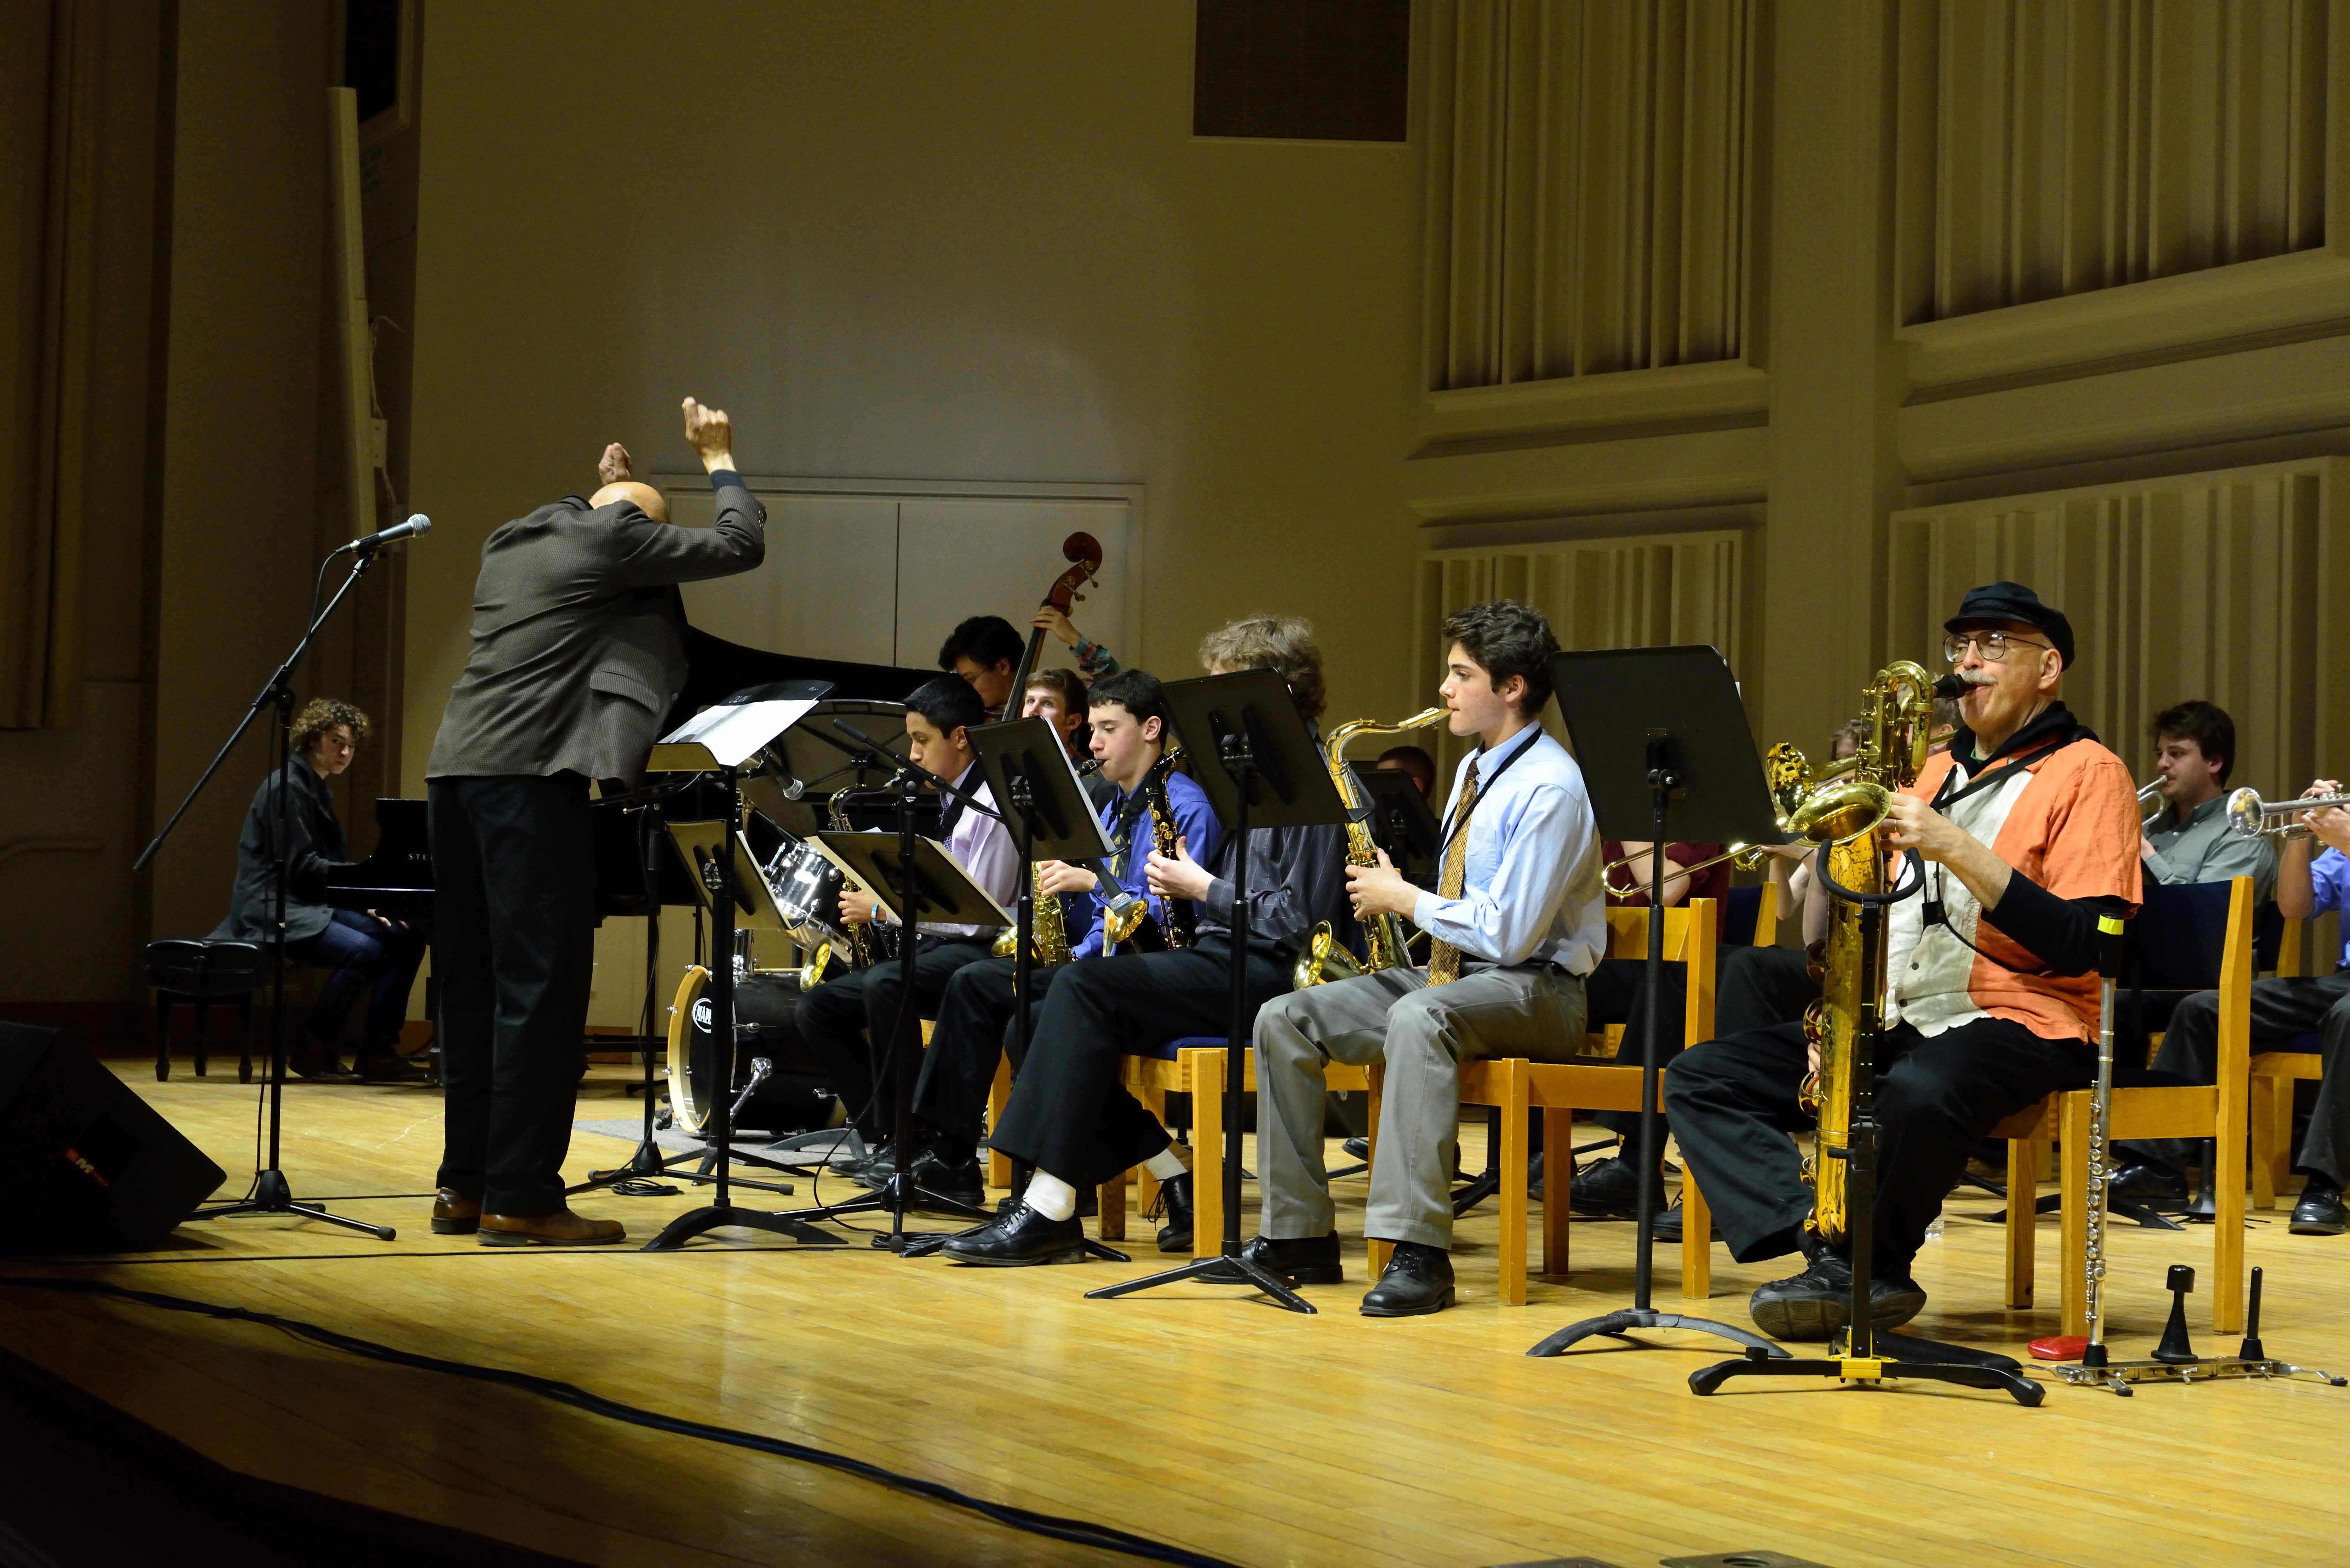 The Bard College Community Jazz Orchestra